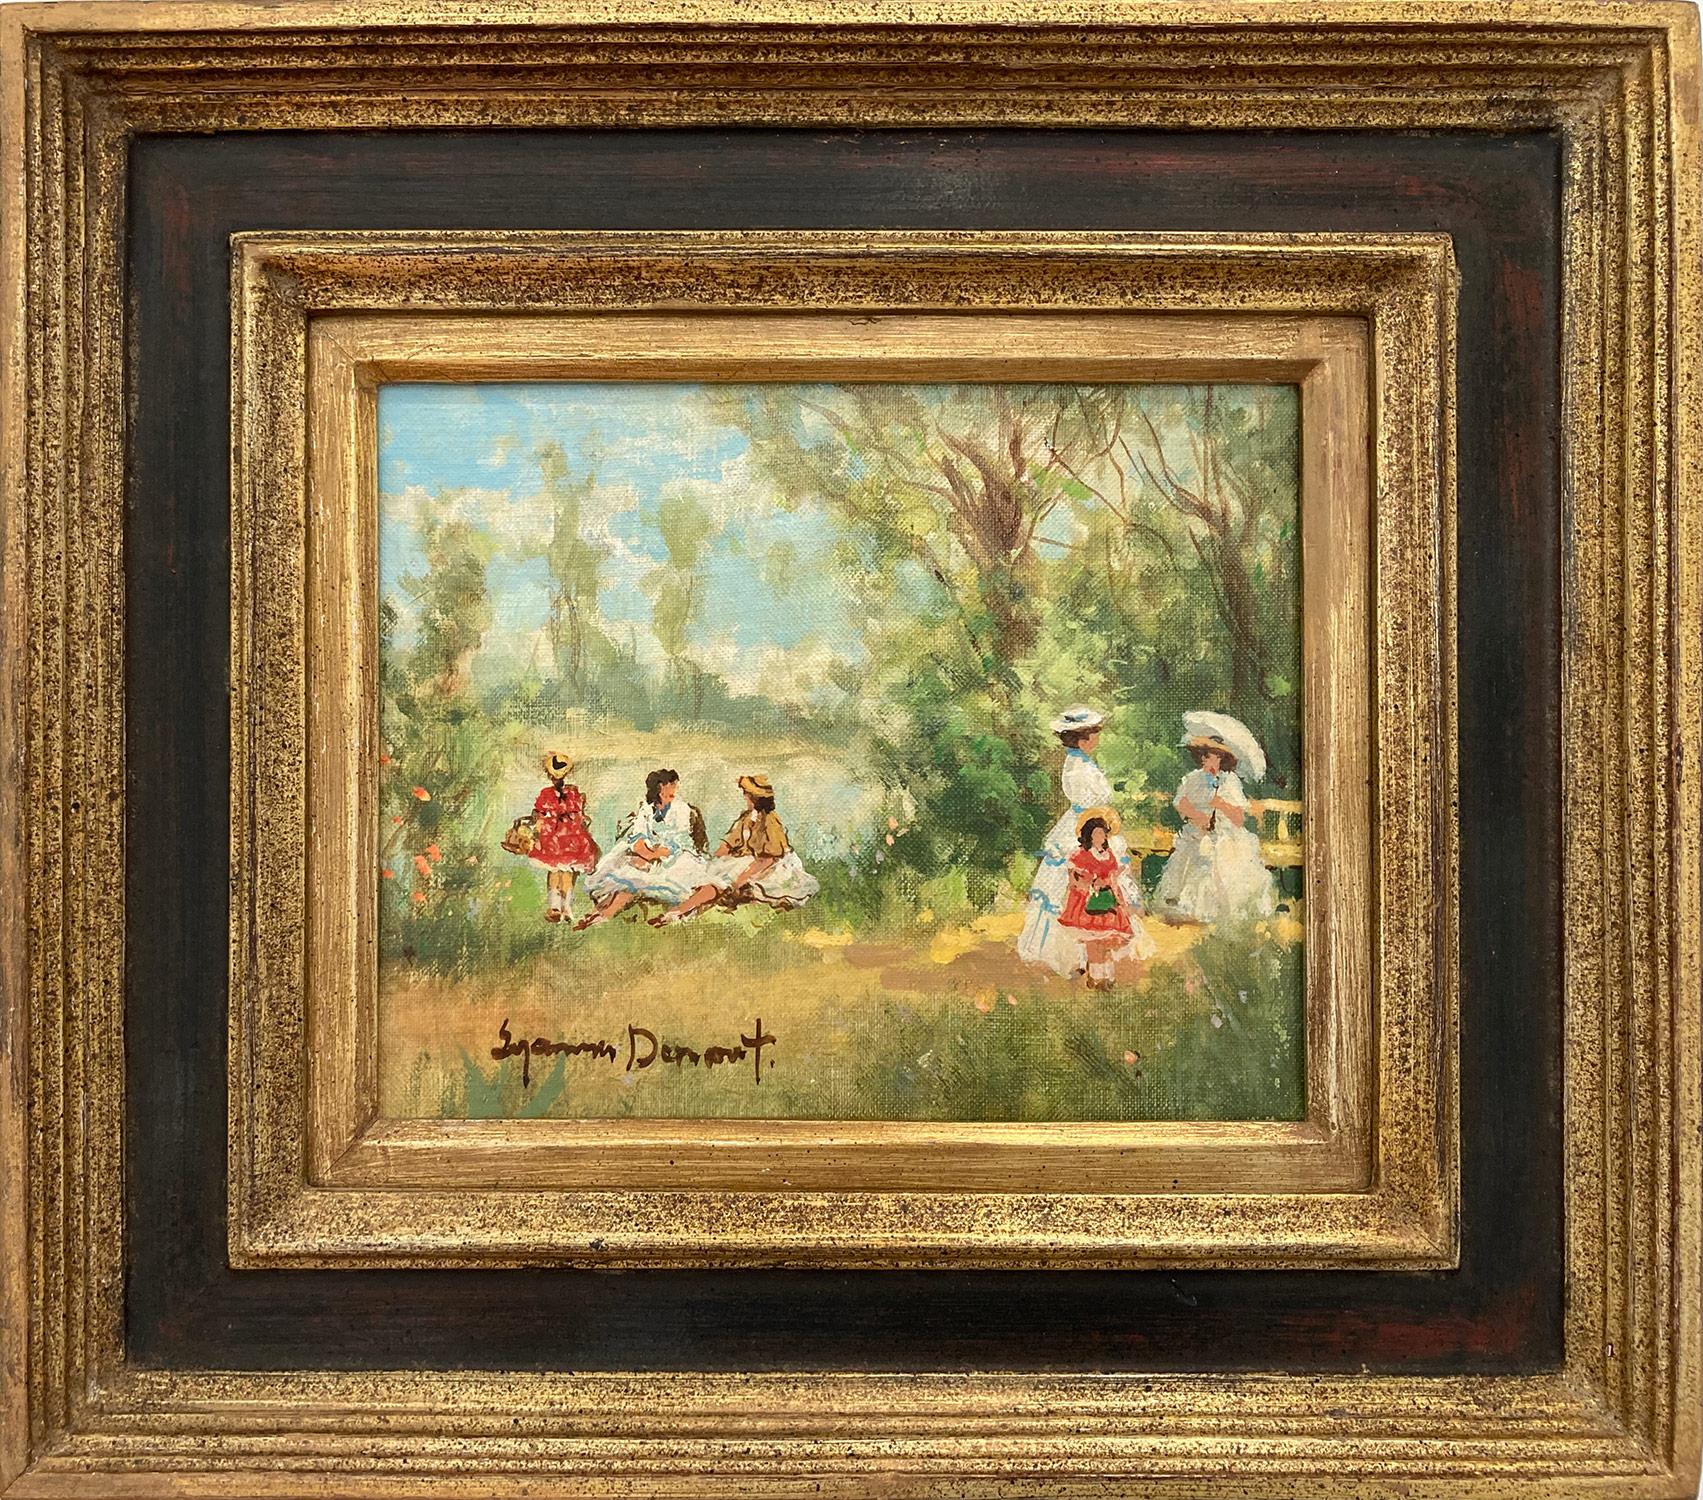 Suzanne Demarest  Figurative Painting - "Lakeside Park Scene with Figures" Impressionist French Oil Painting on Canvas